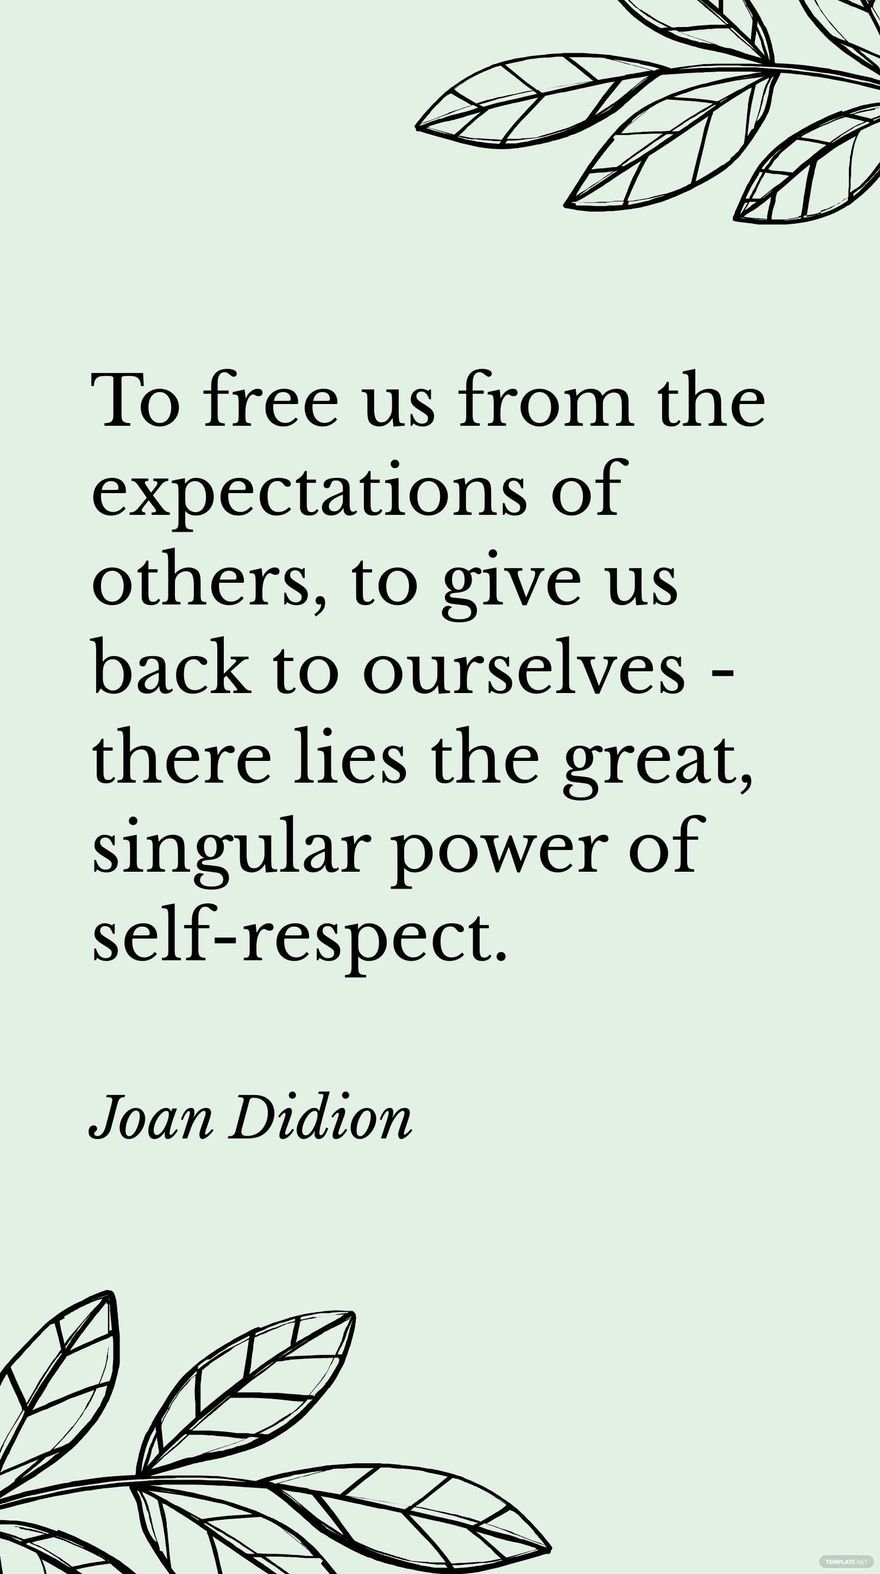 Joan Didion - To us from the expectations of others, to give us back to ourselves - there lies the great, singular power of self-respect.